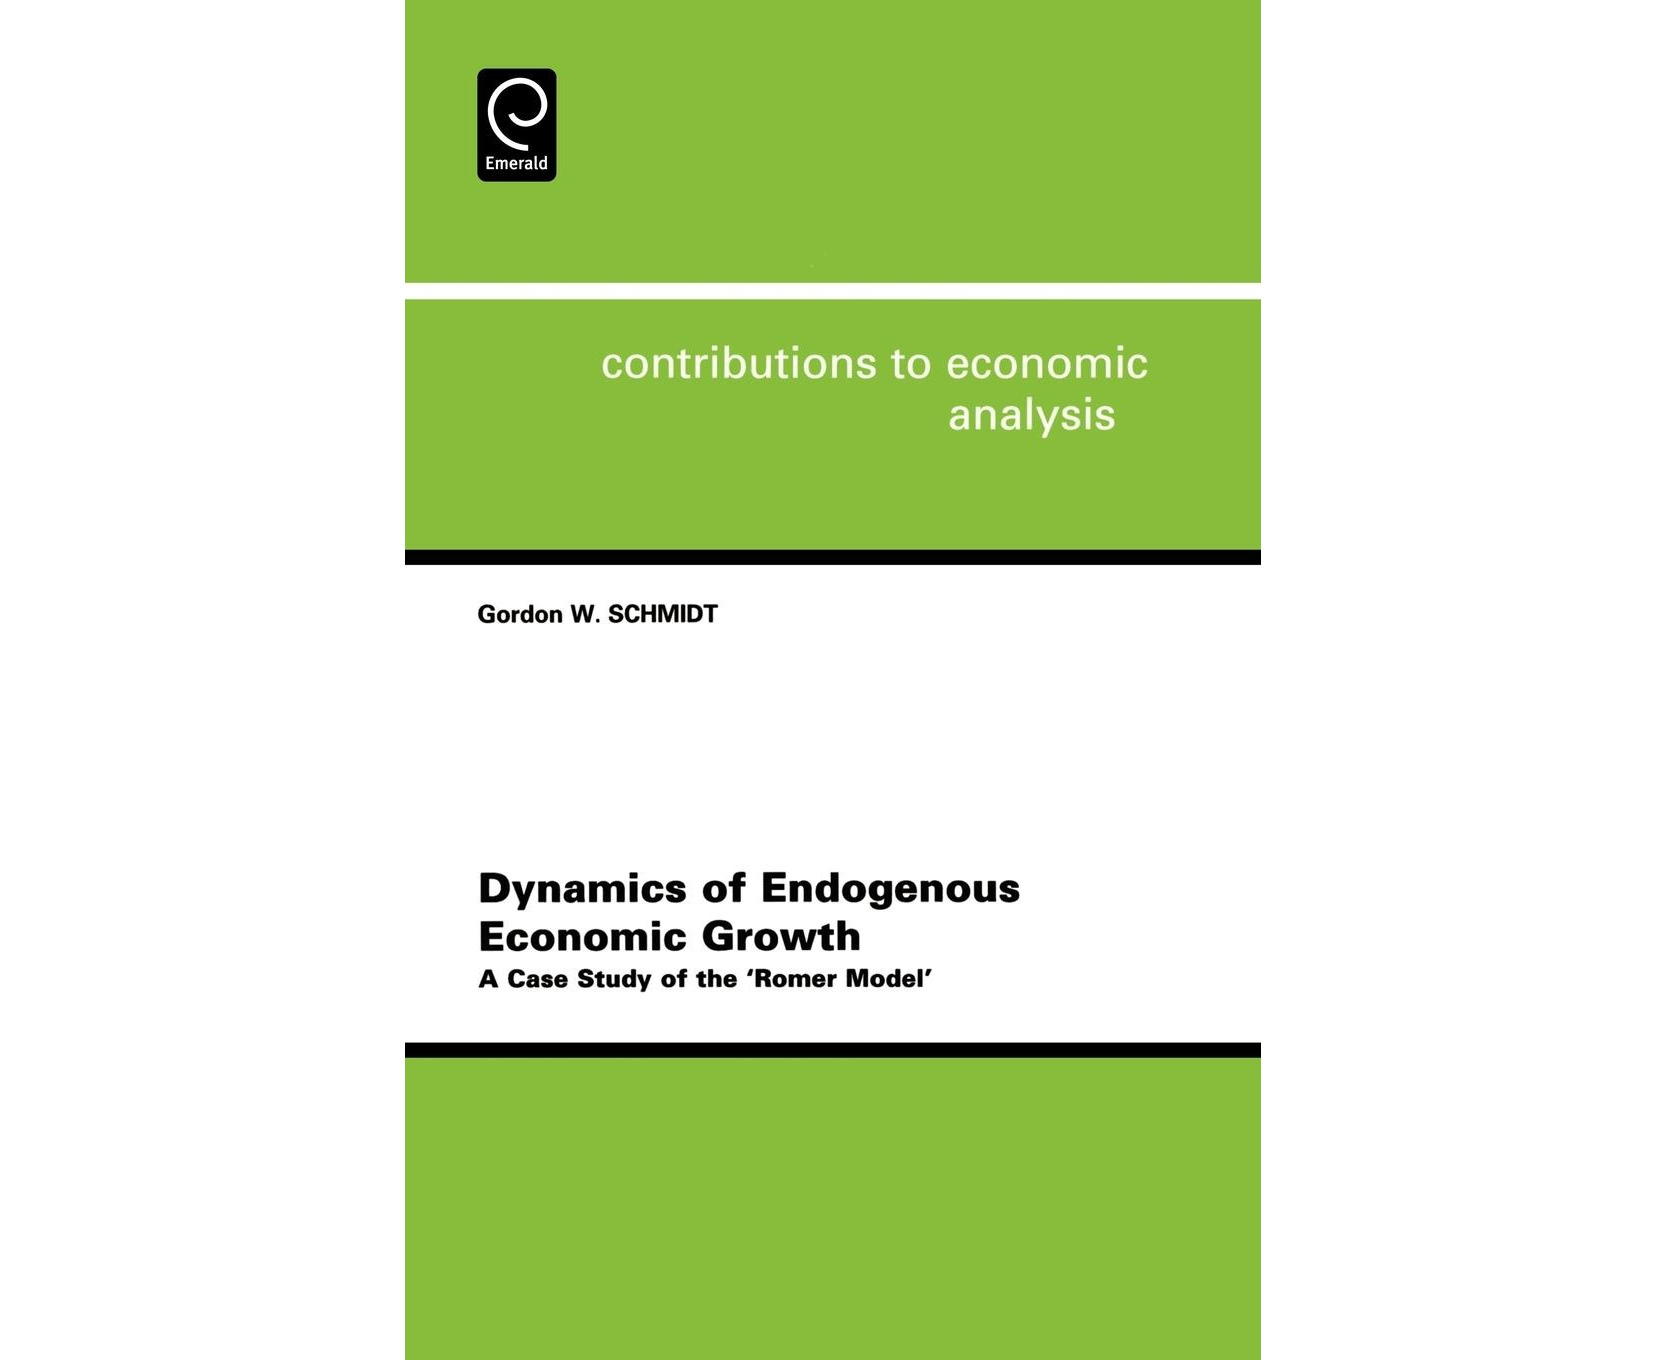 Dynamics of Endogenous Economic Growth: A Case Study of the Romer